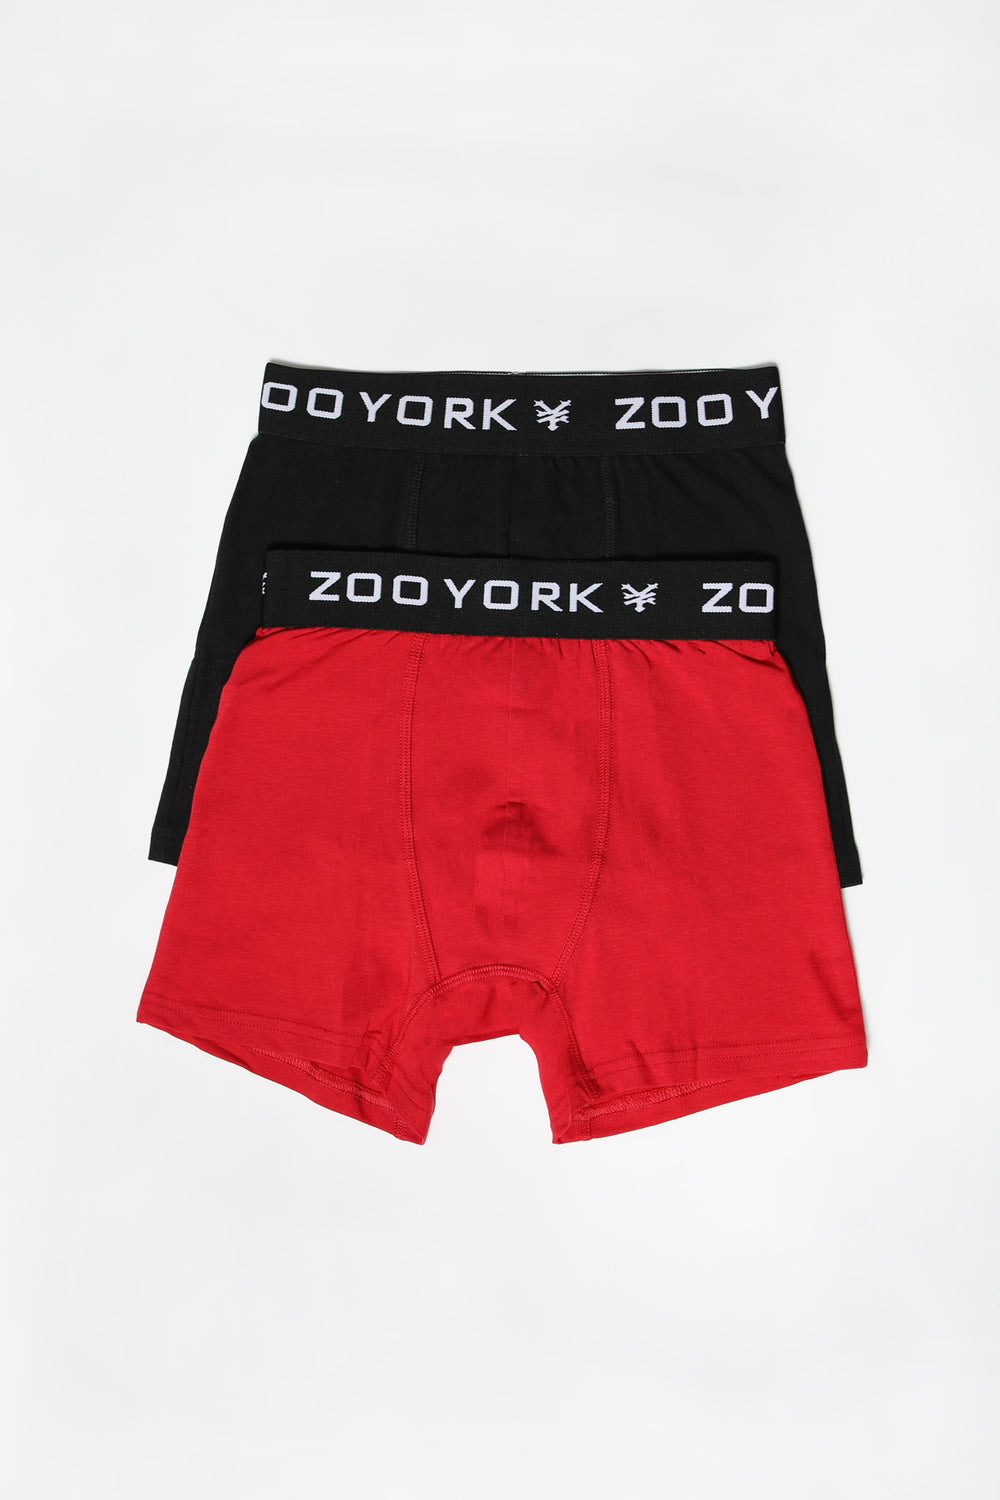 Zoo York Youth 2-Pack Boxer Briefs Zoo York Youth 2-Pack Boxer Briefs